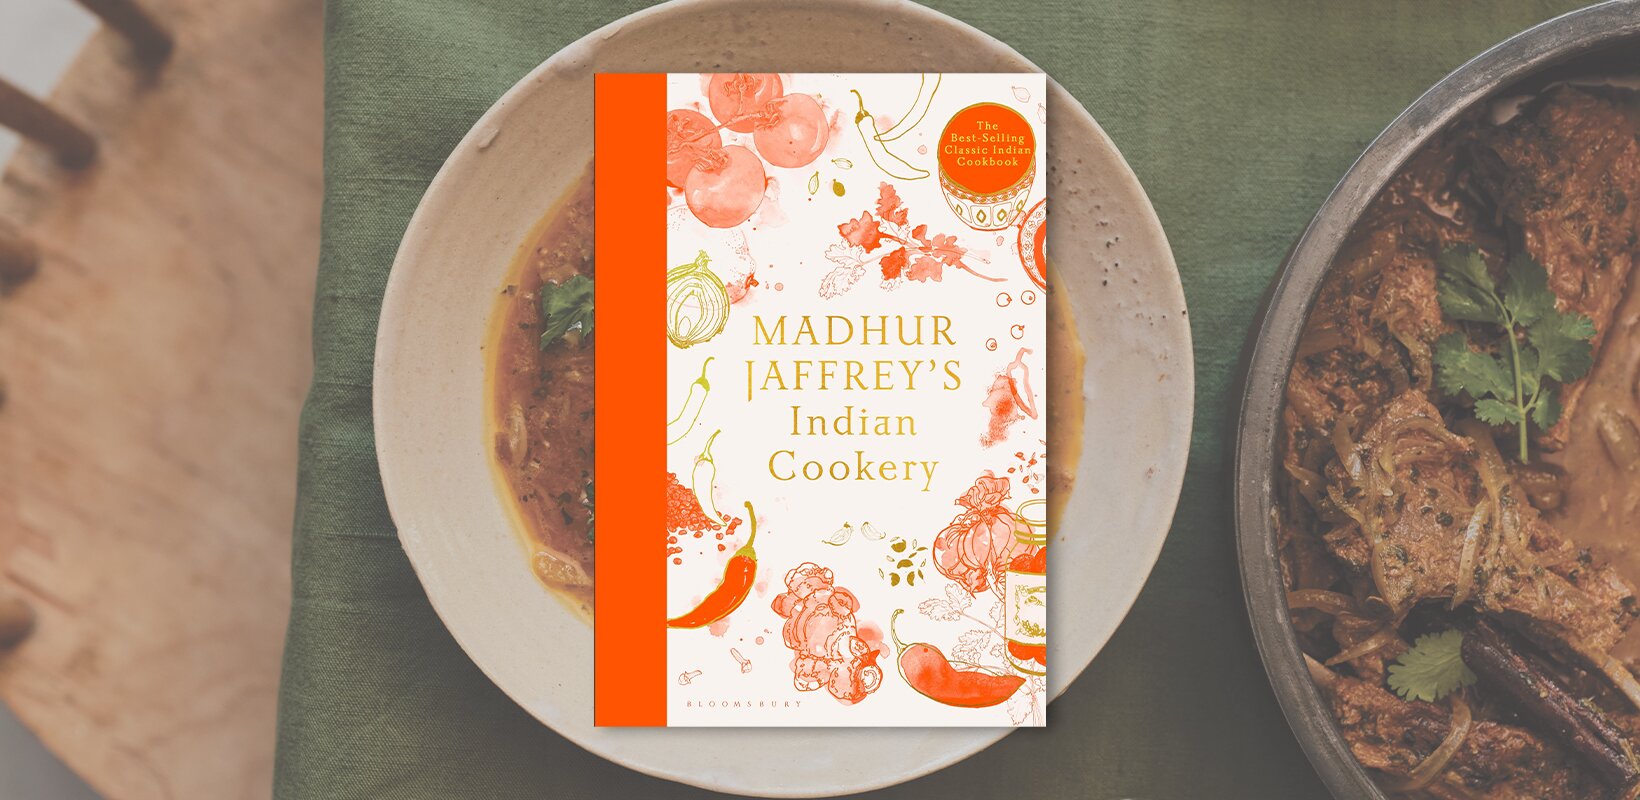 Book review: Madhur Jaffrey’s Indian Cookery